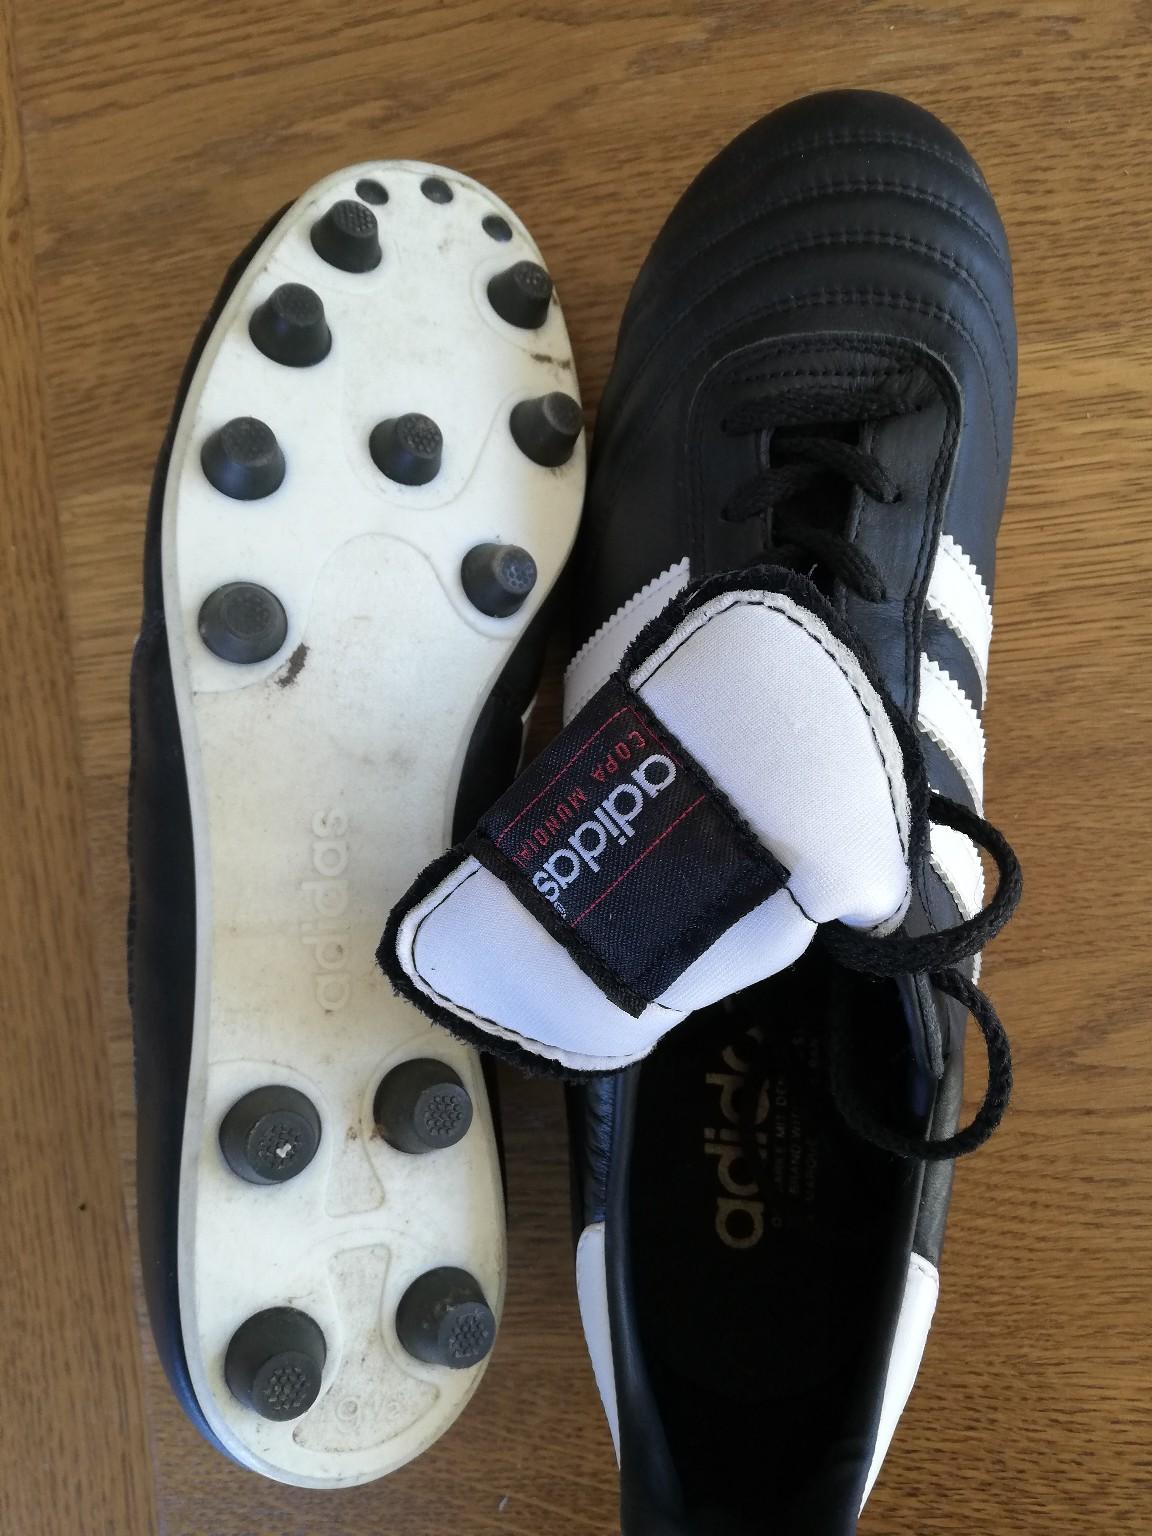 Adidas Copa Mundial size 9.5 in L40 Chorley for £40.00 for sale | Shpock